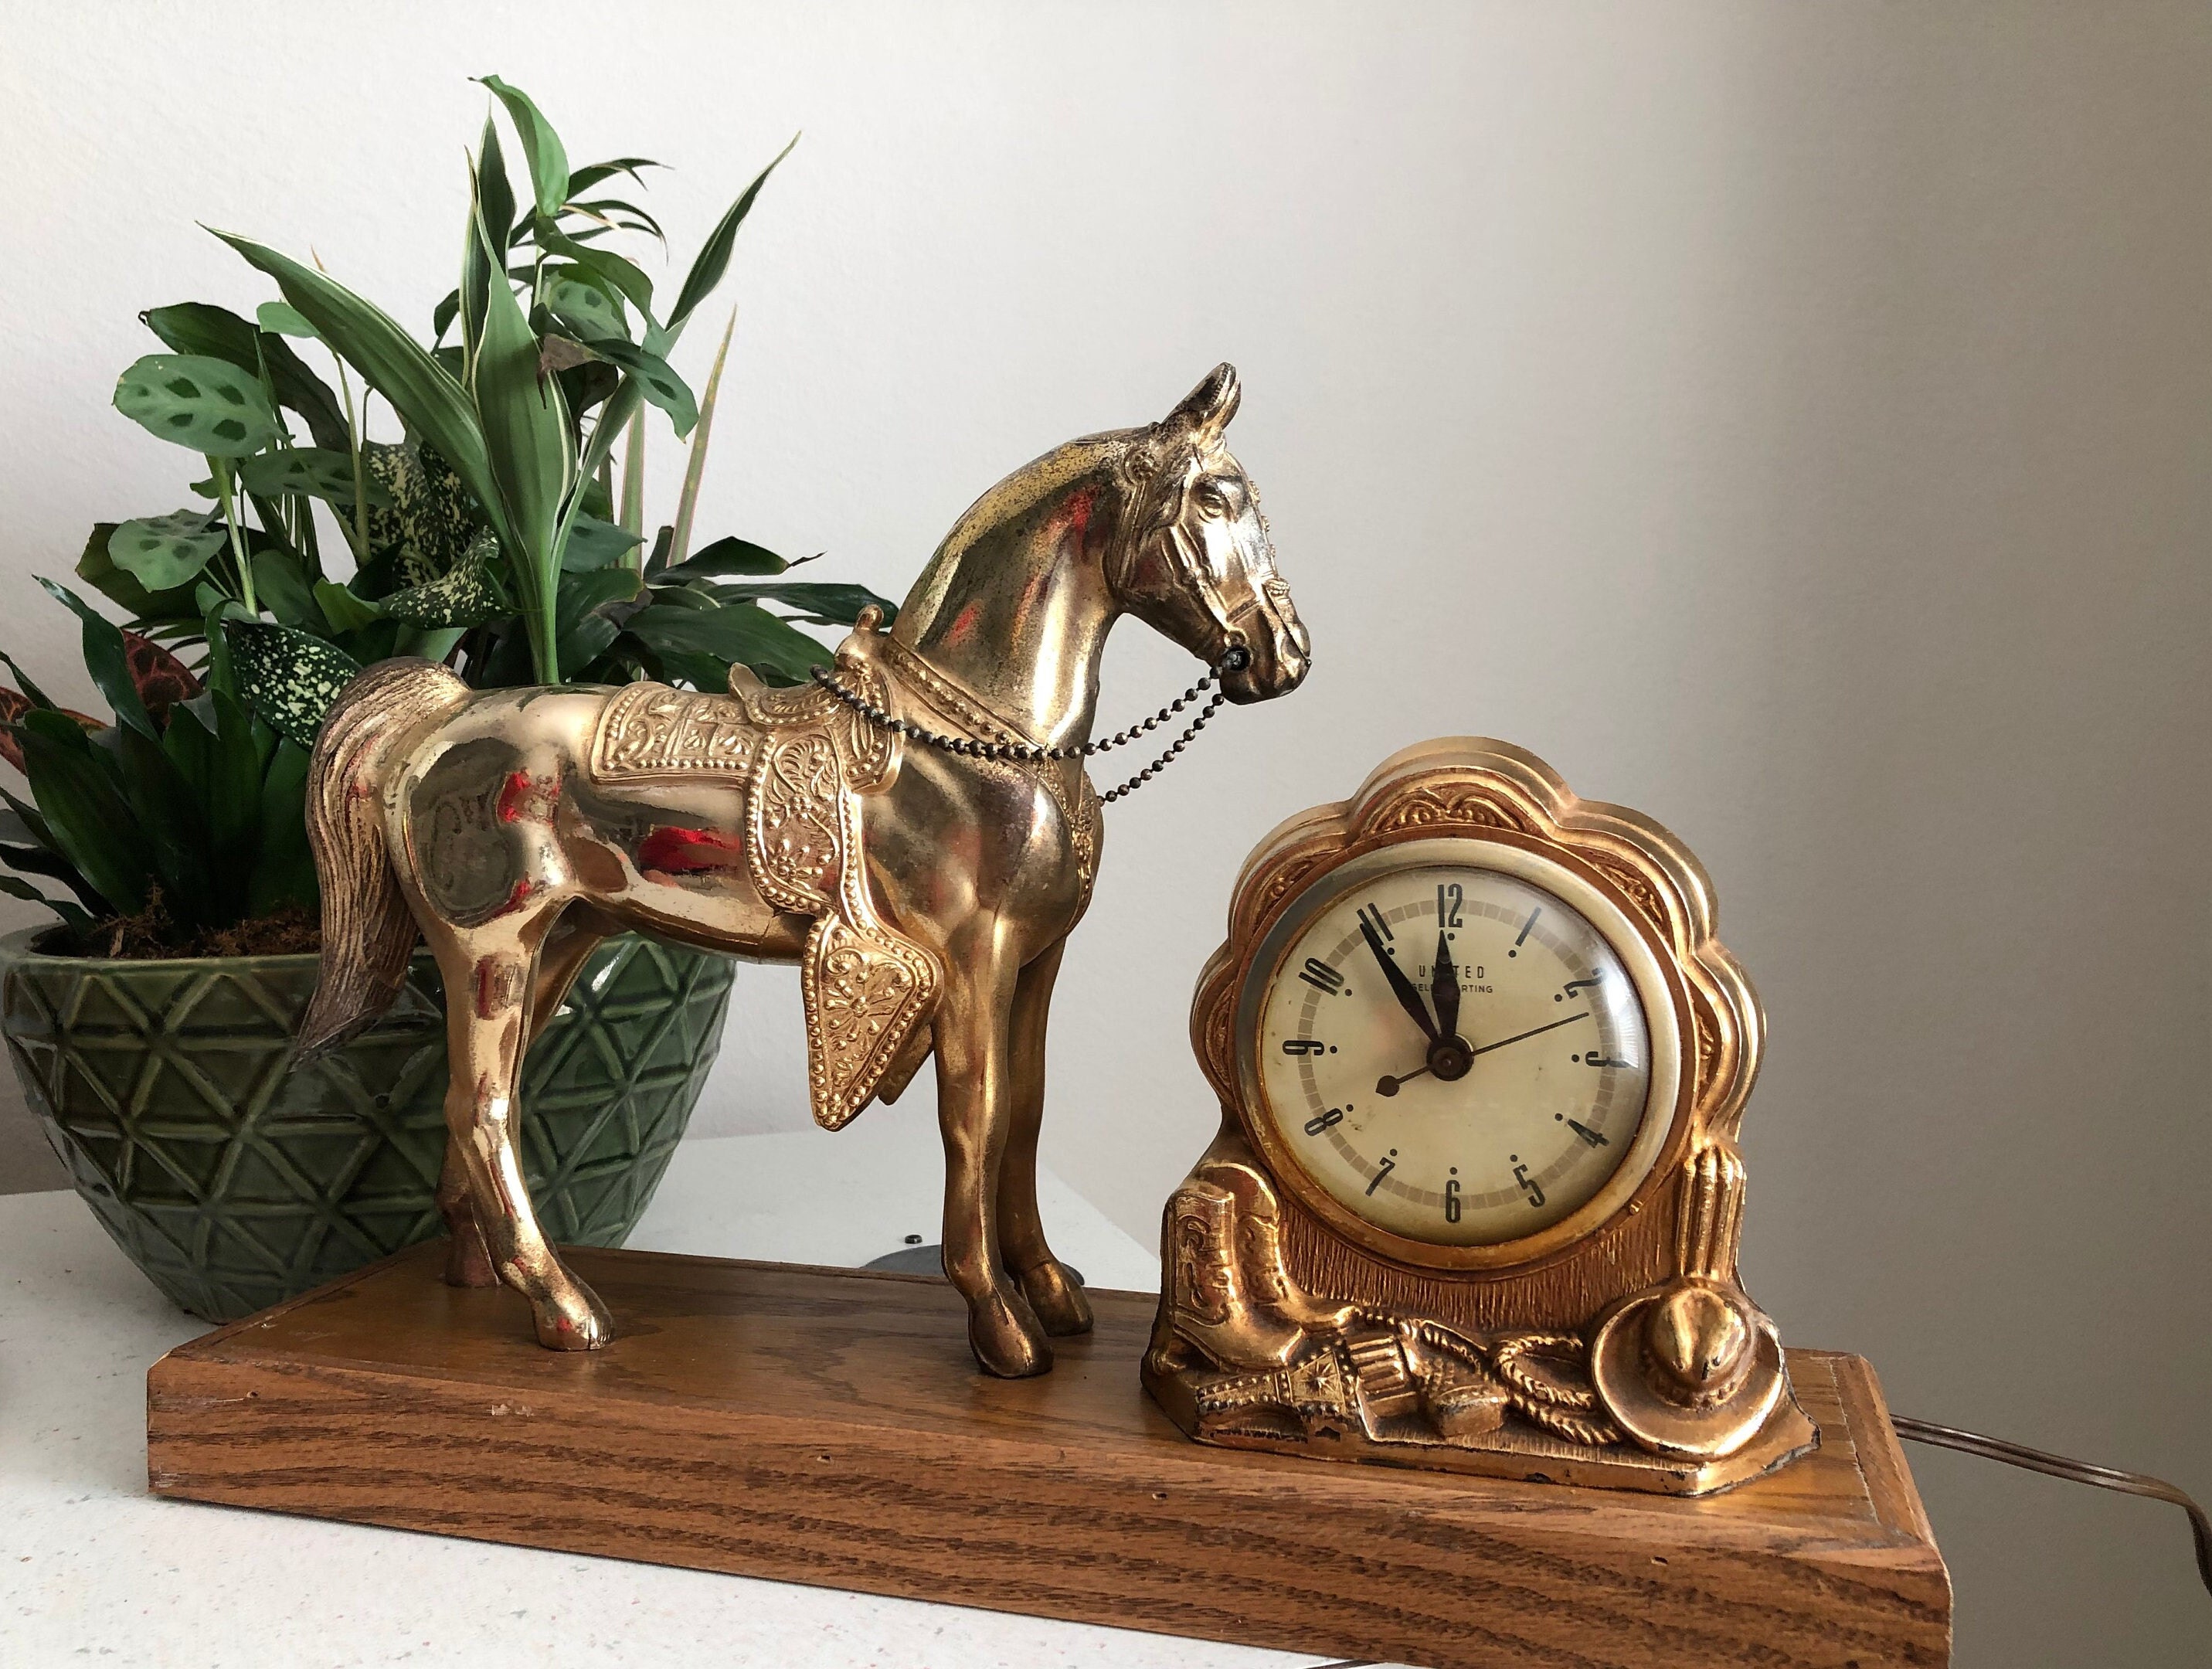 Horse Alarm Clock - Animal Alarm - Led - With Light - Glow In The